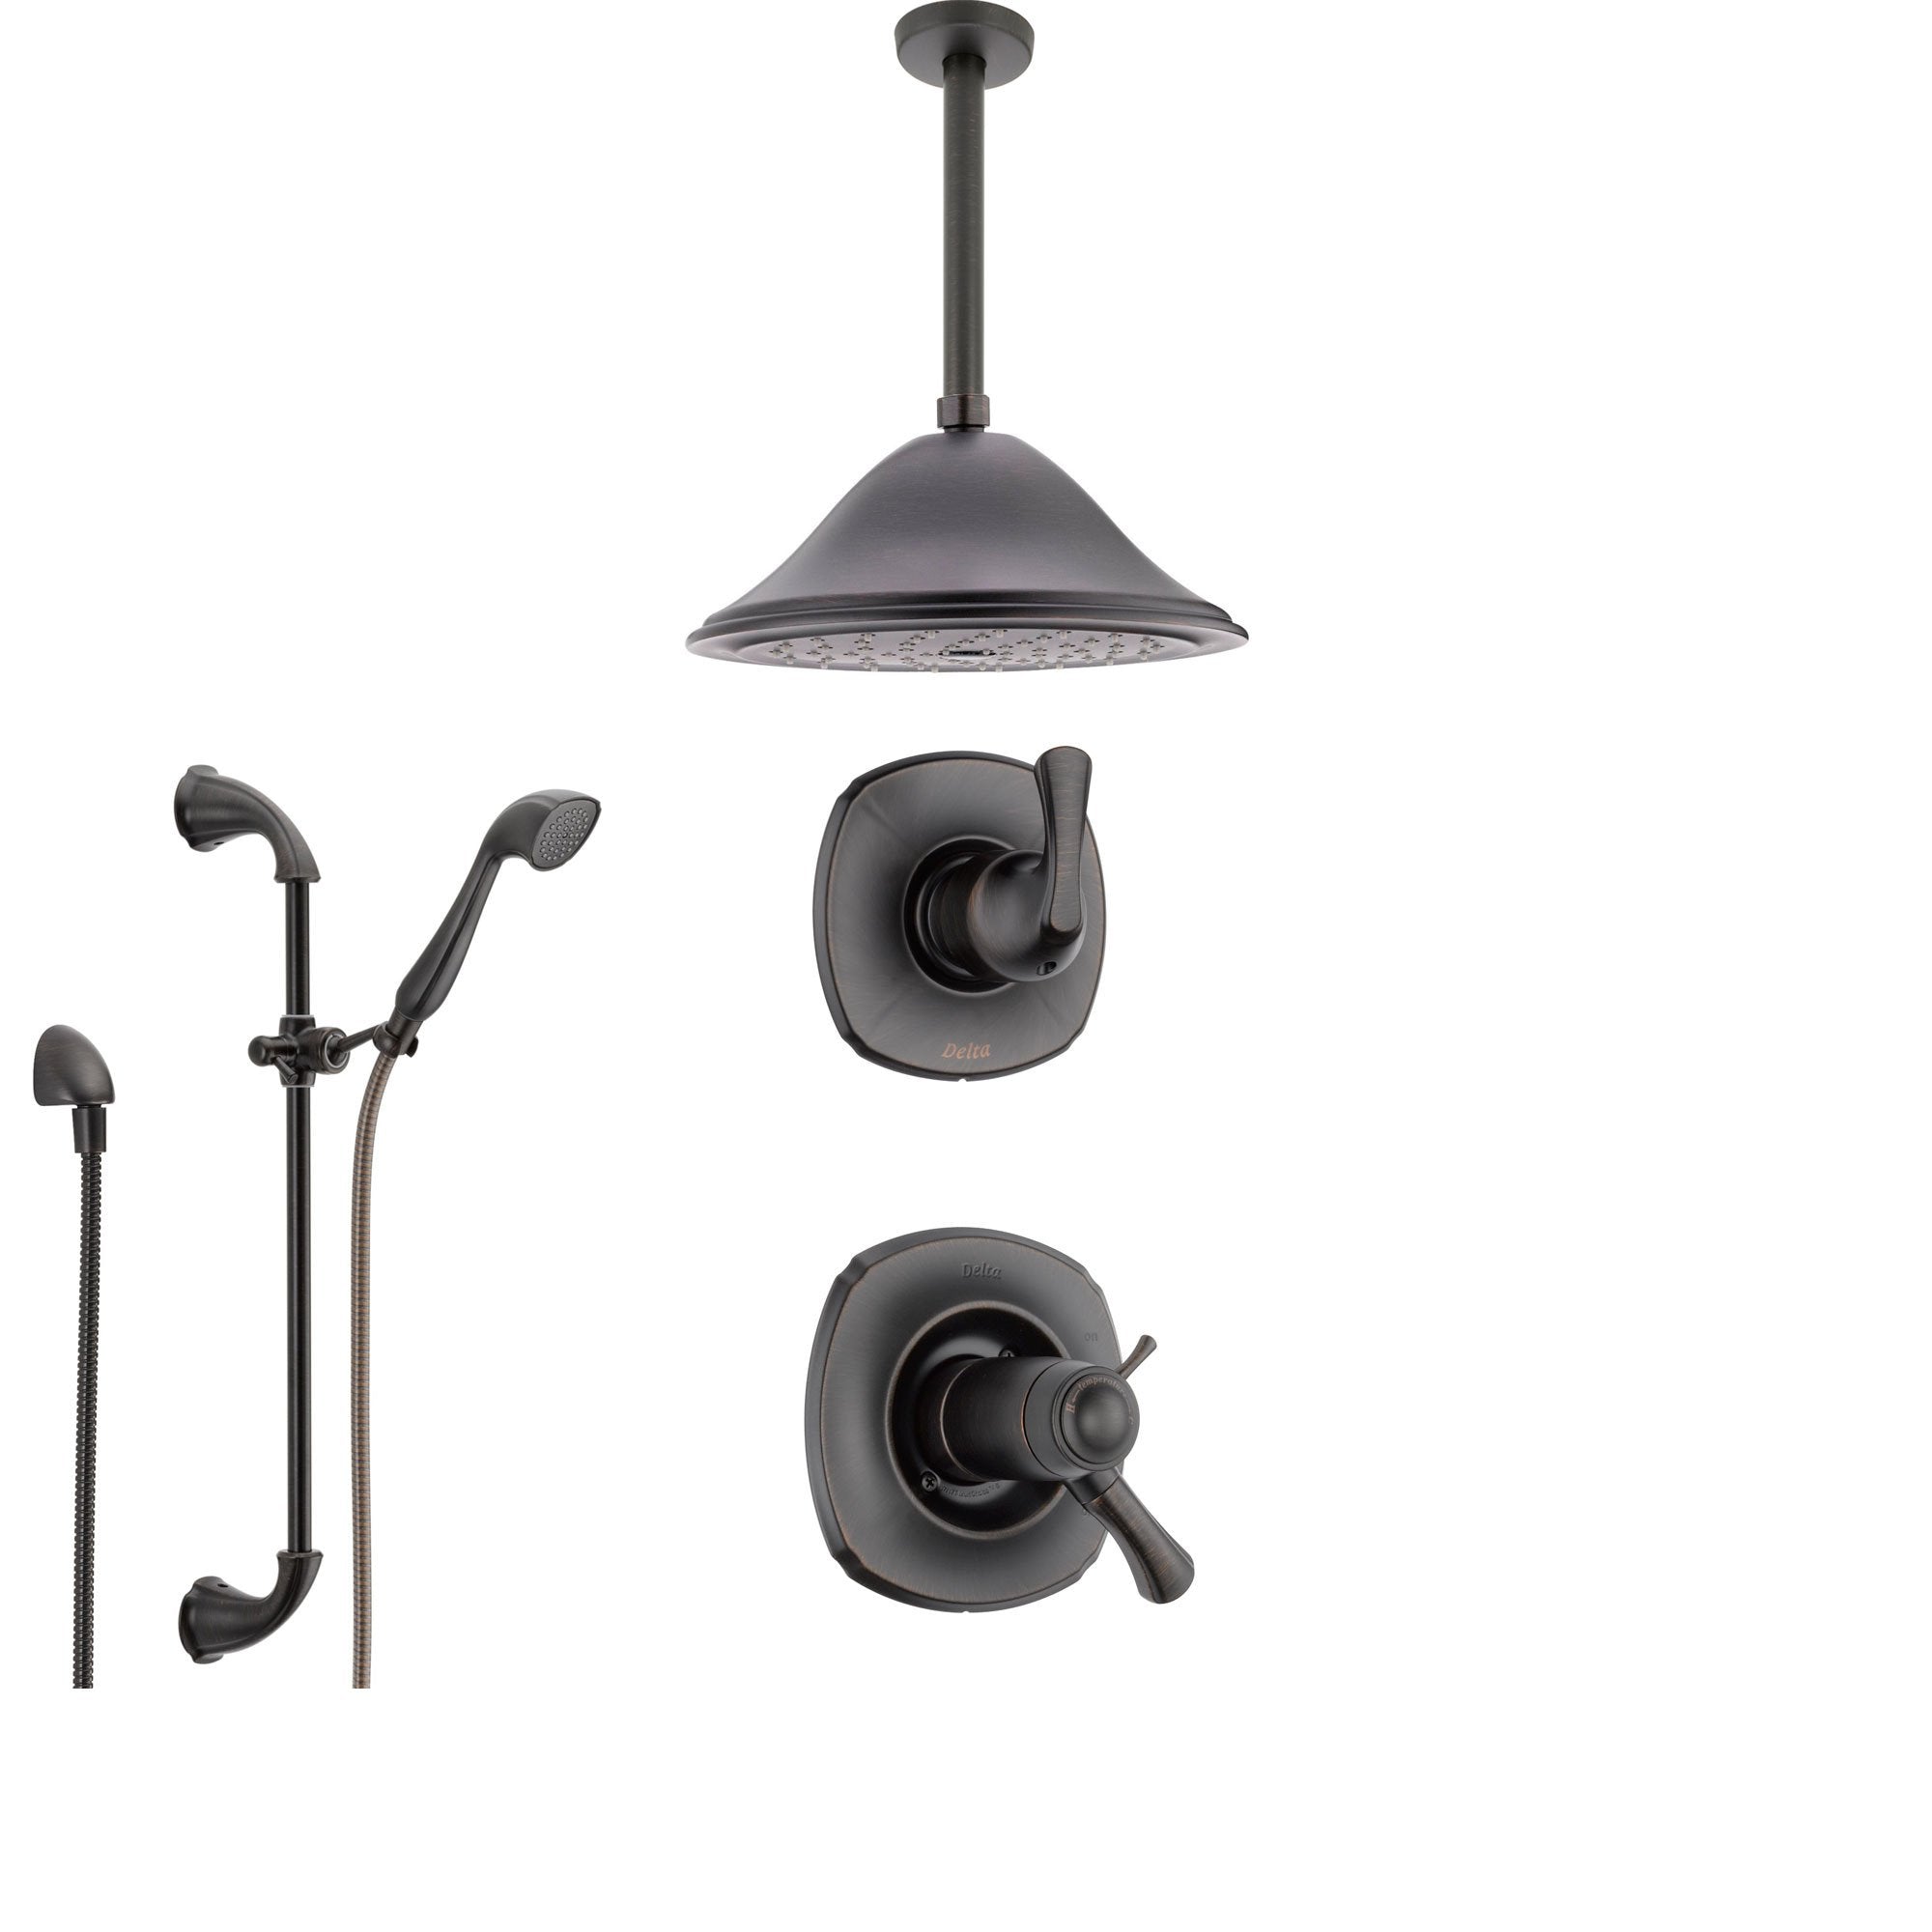 Delta Addison Venetian Bronze Shower System with Thermostatic Shower Handle, 3-setting Diverter, Large Ceiling Mount Rain Showerhead, and Handheld Shower SS17T9281RB